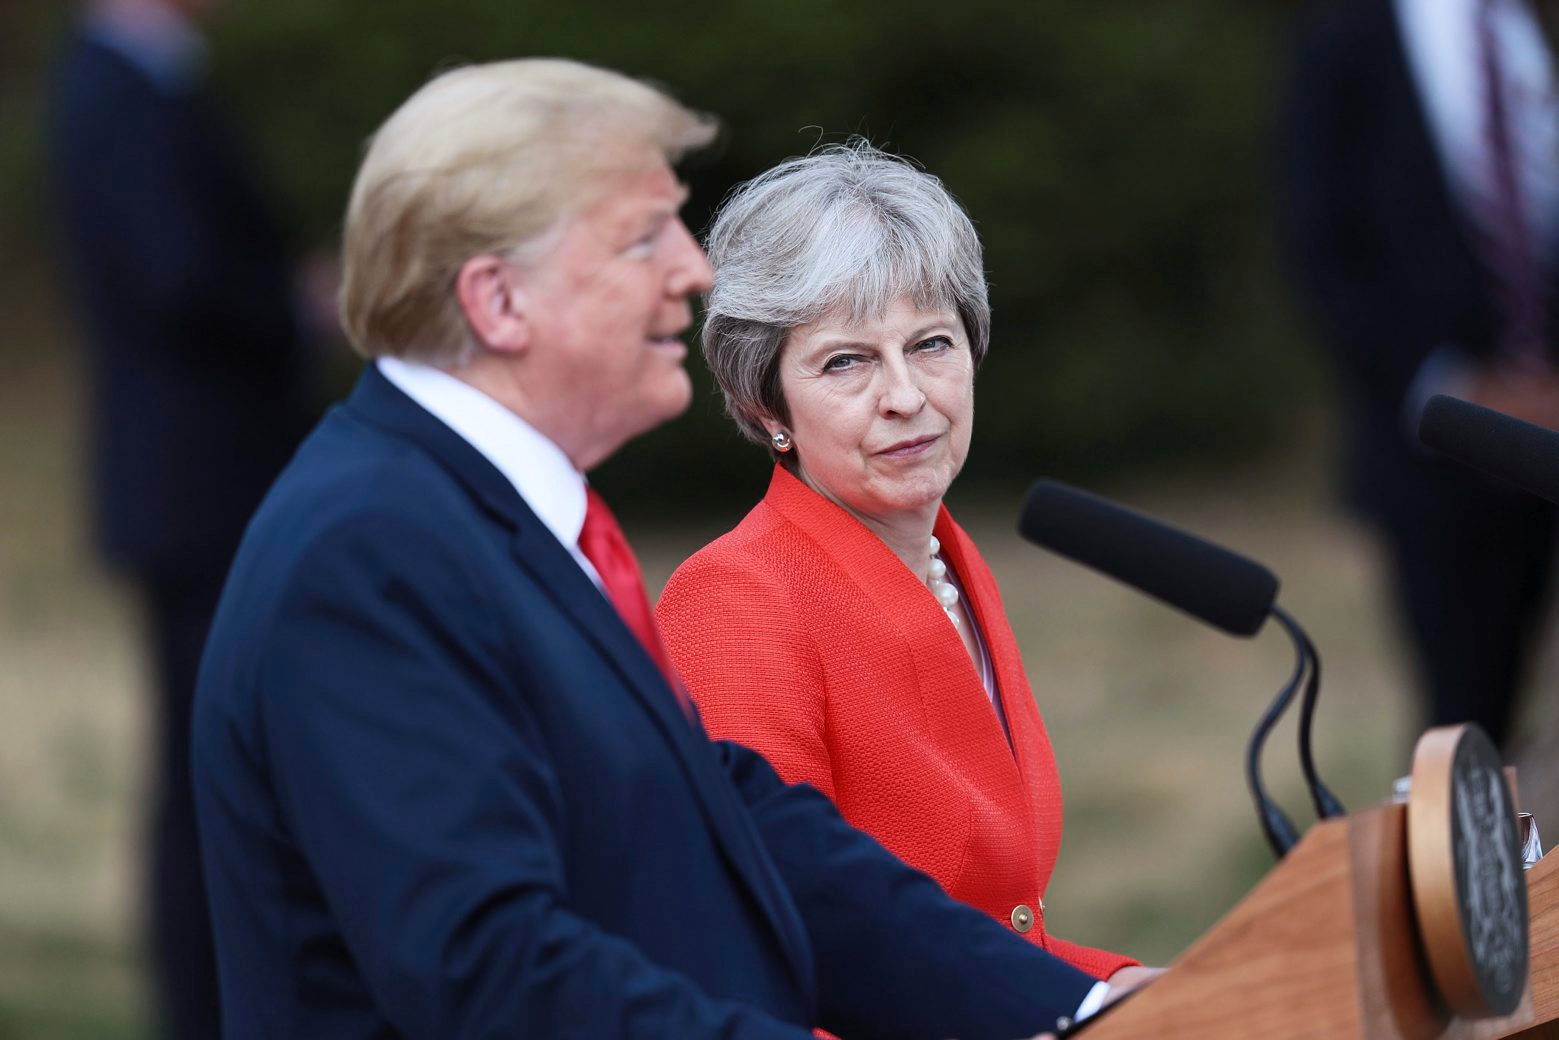 British Prime Minister Theresa May and U.S President Donald Trump hold a joint press conference at Chequers, in Buckinghamshire, England, Friday, July 13, 2018. (Jack Taylor/Pool Photo via AP) Britain Trump Visit